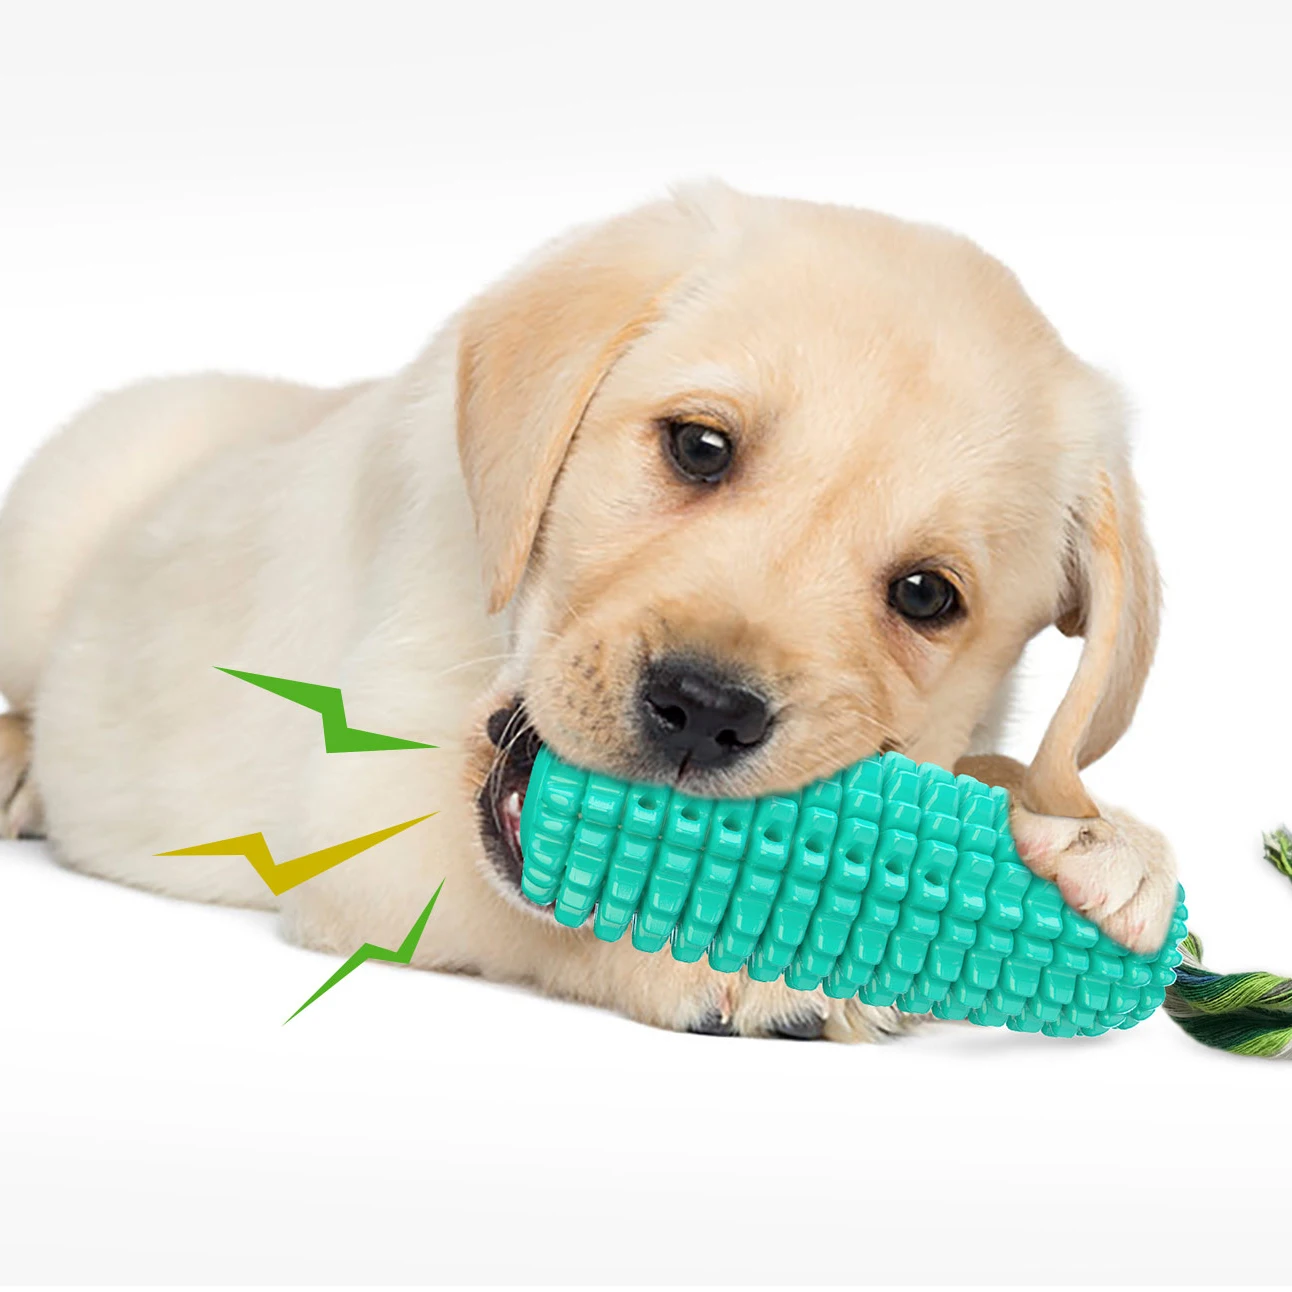 

Squeak dog toothbrush toy floating on water outdoor pet suppliers china factory price corn shape dog chew toy set